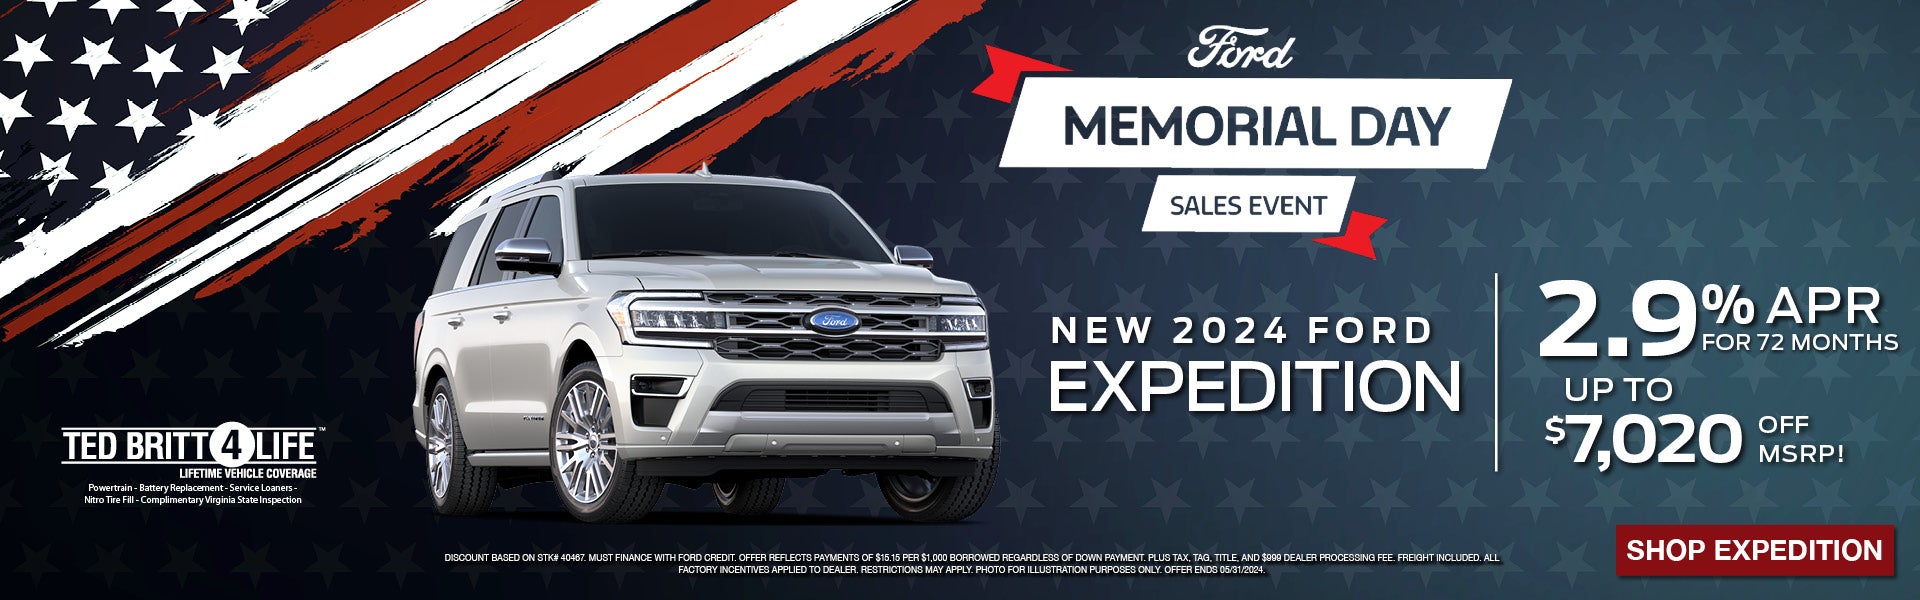 NEW 2024 FORD EXPEDITION